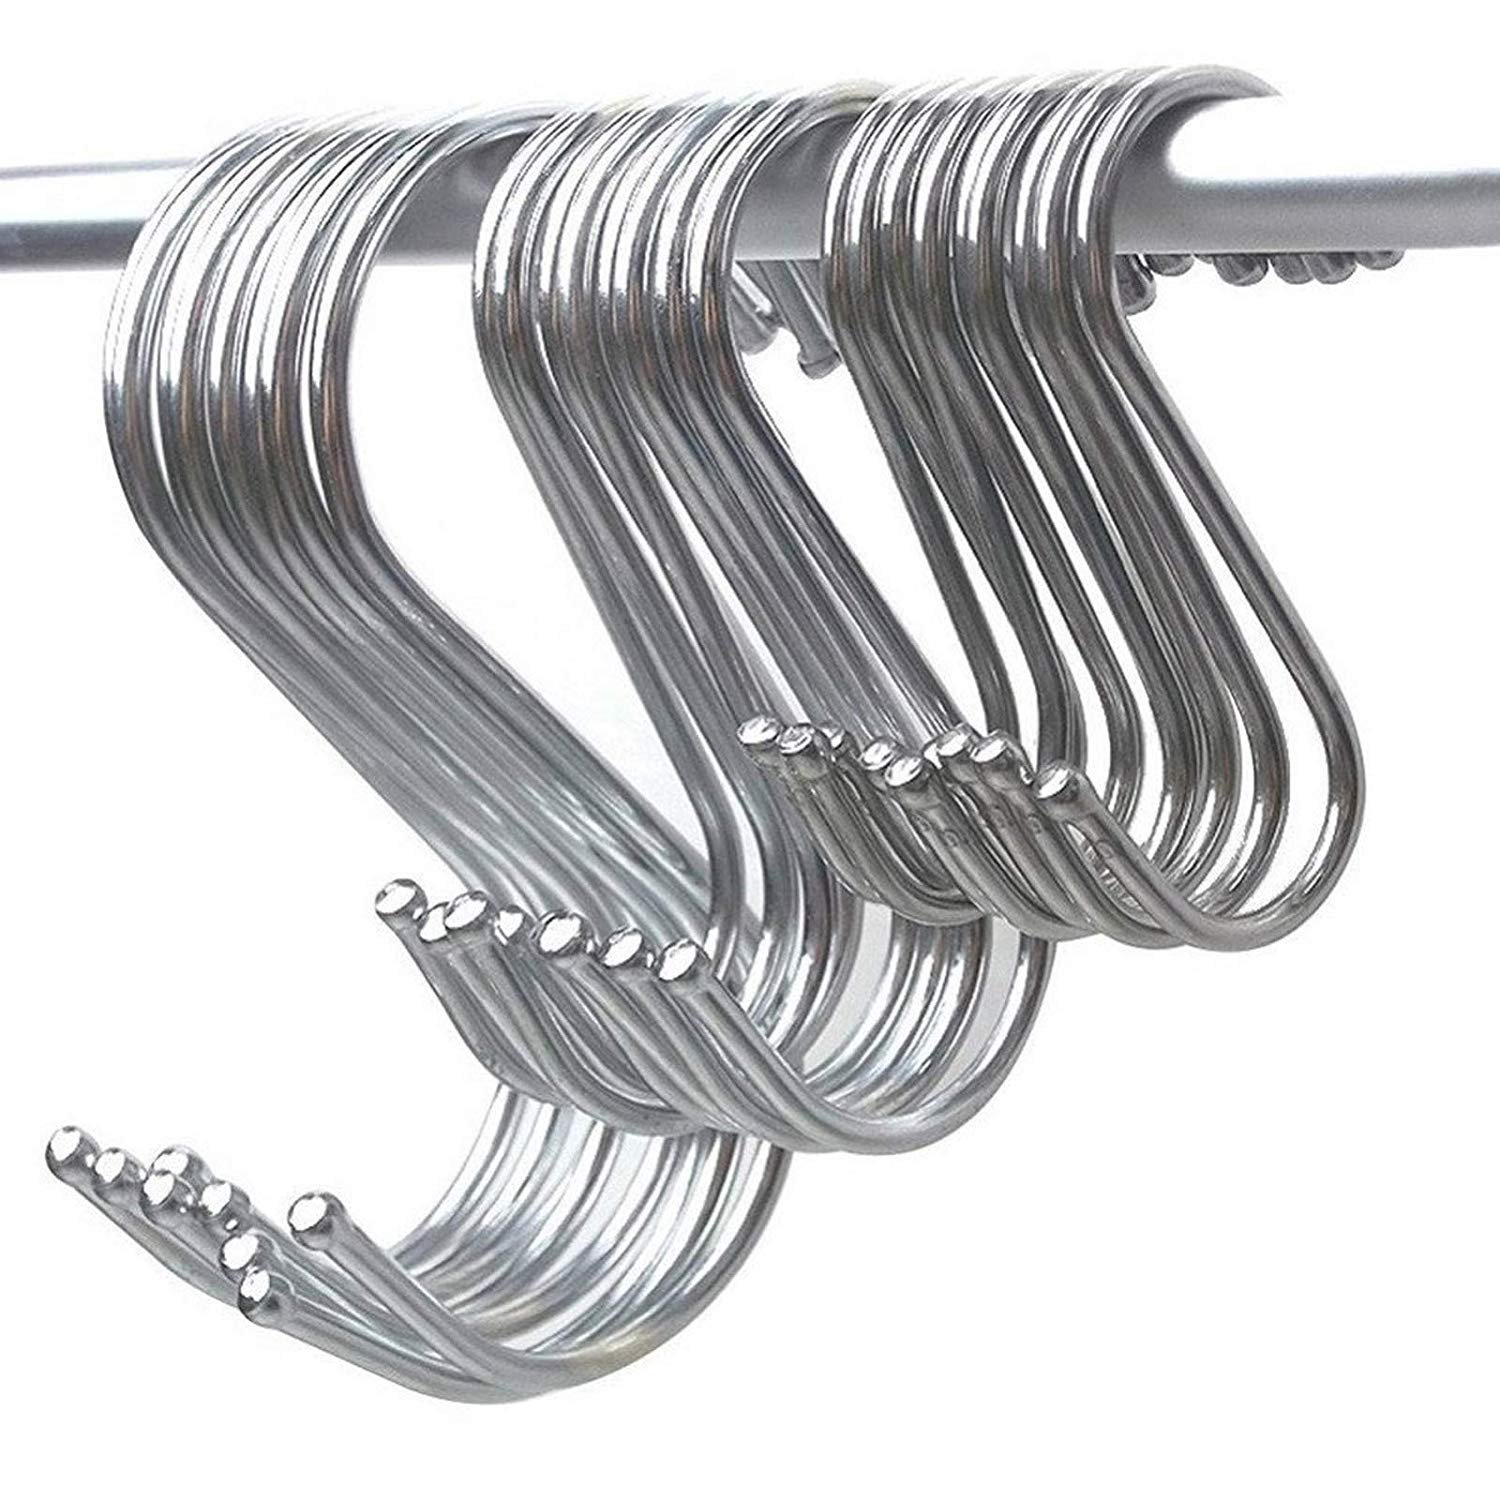 Details about   Fashion Stainless Steel Hooks 20 Pack Key Holders Screw In Hooks Corrosion. 